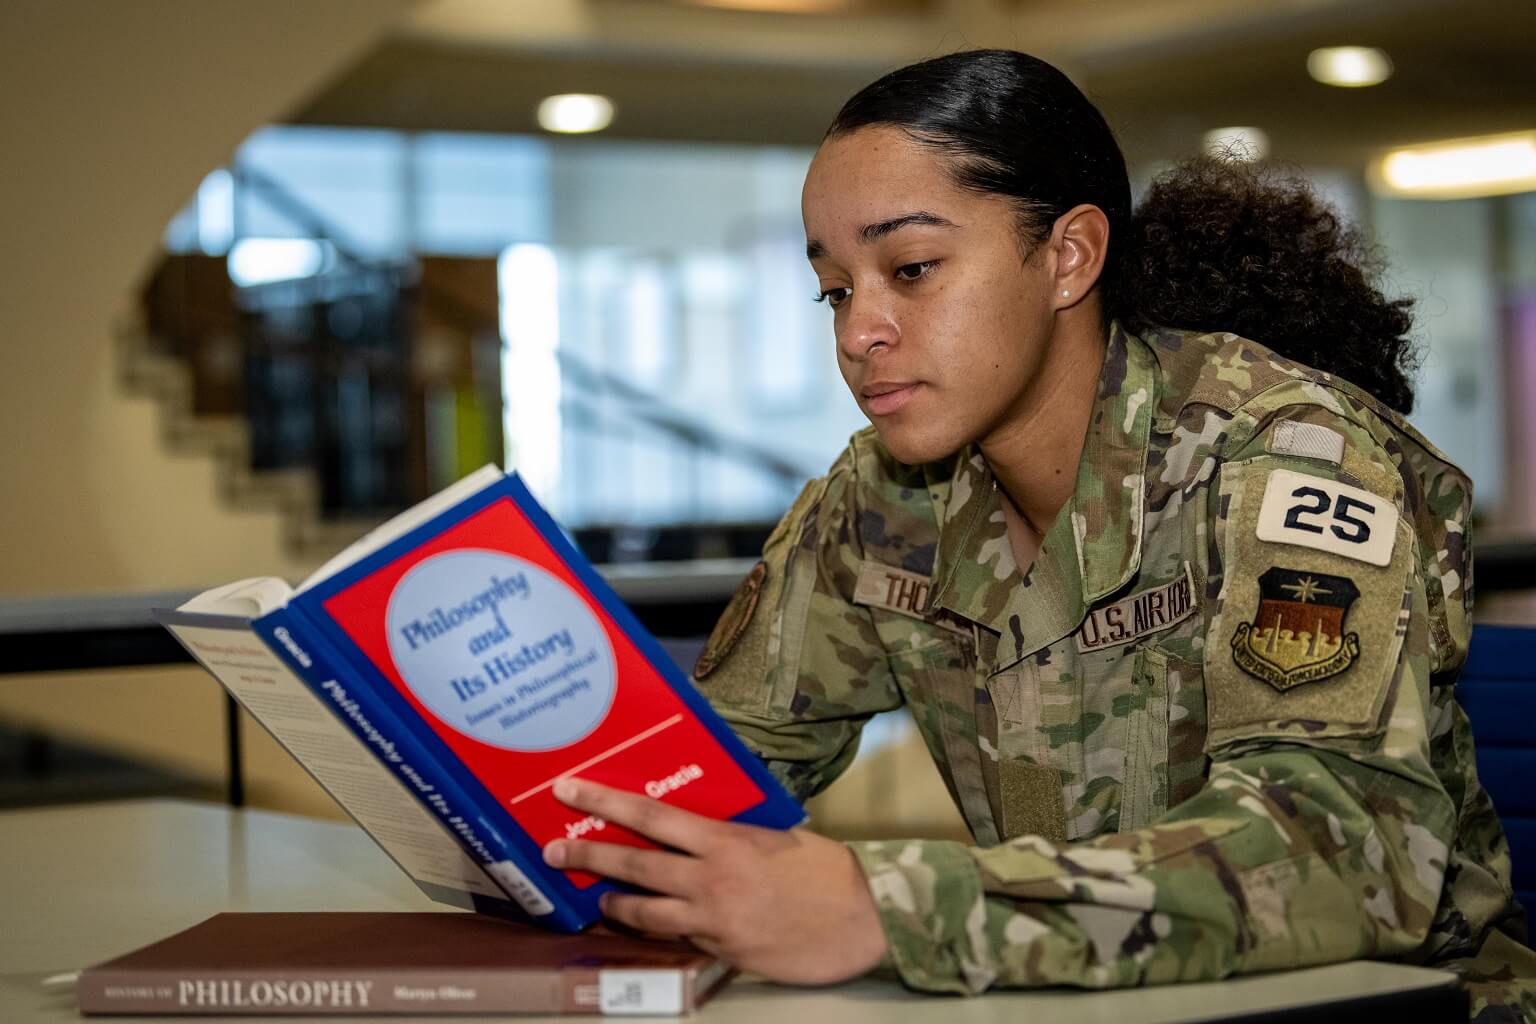 cadet reading philosophy book in library